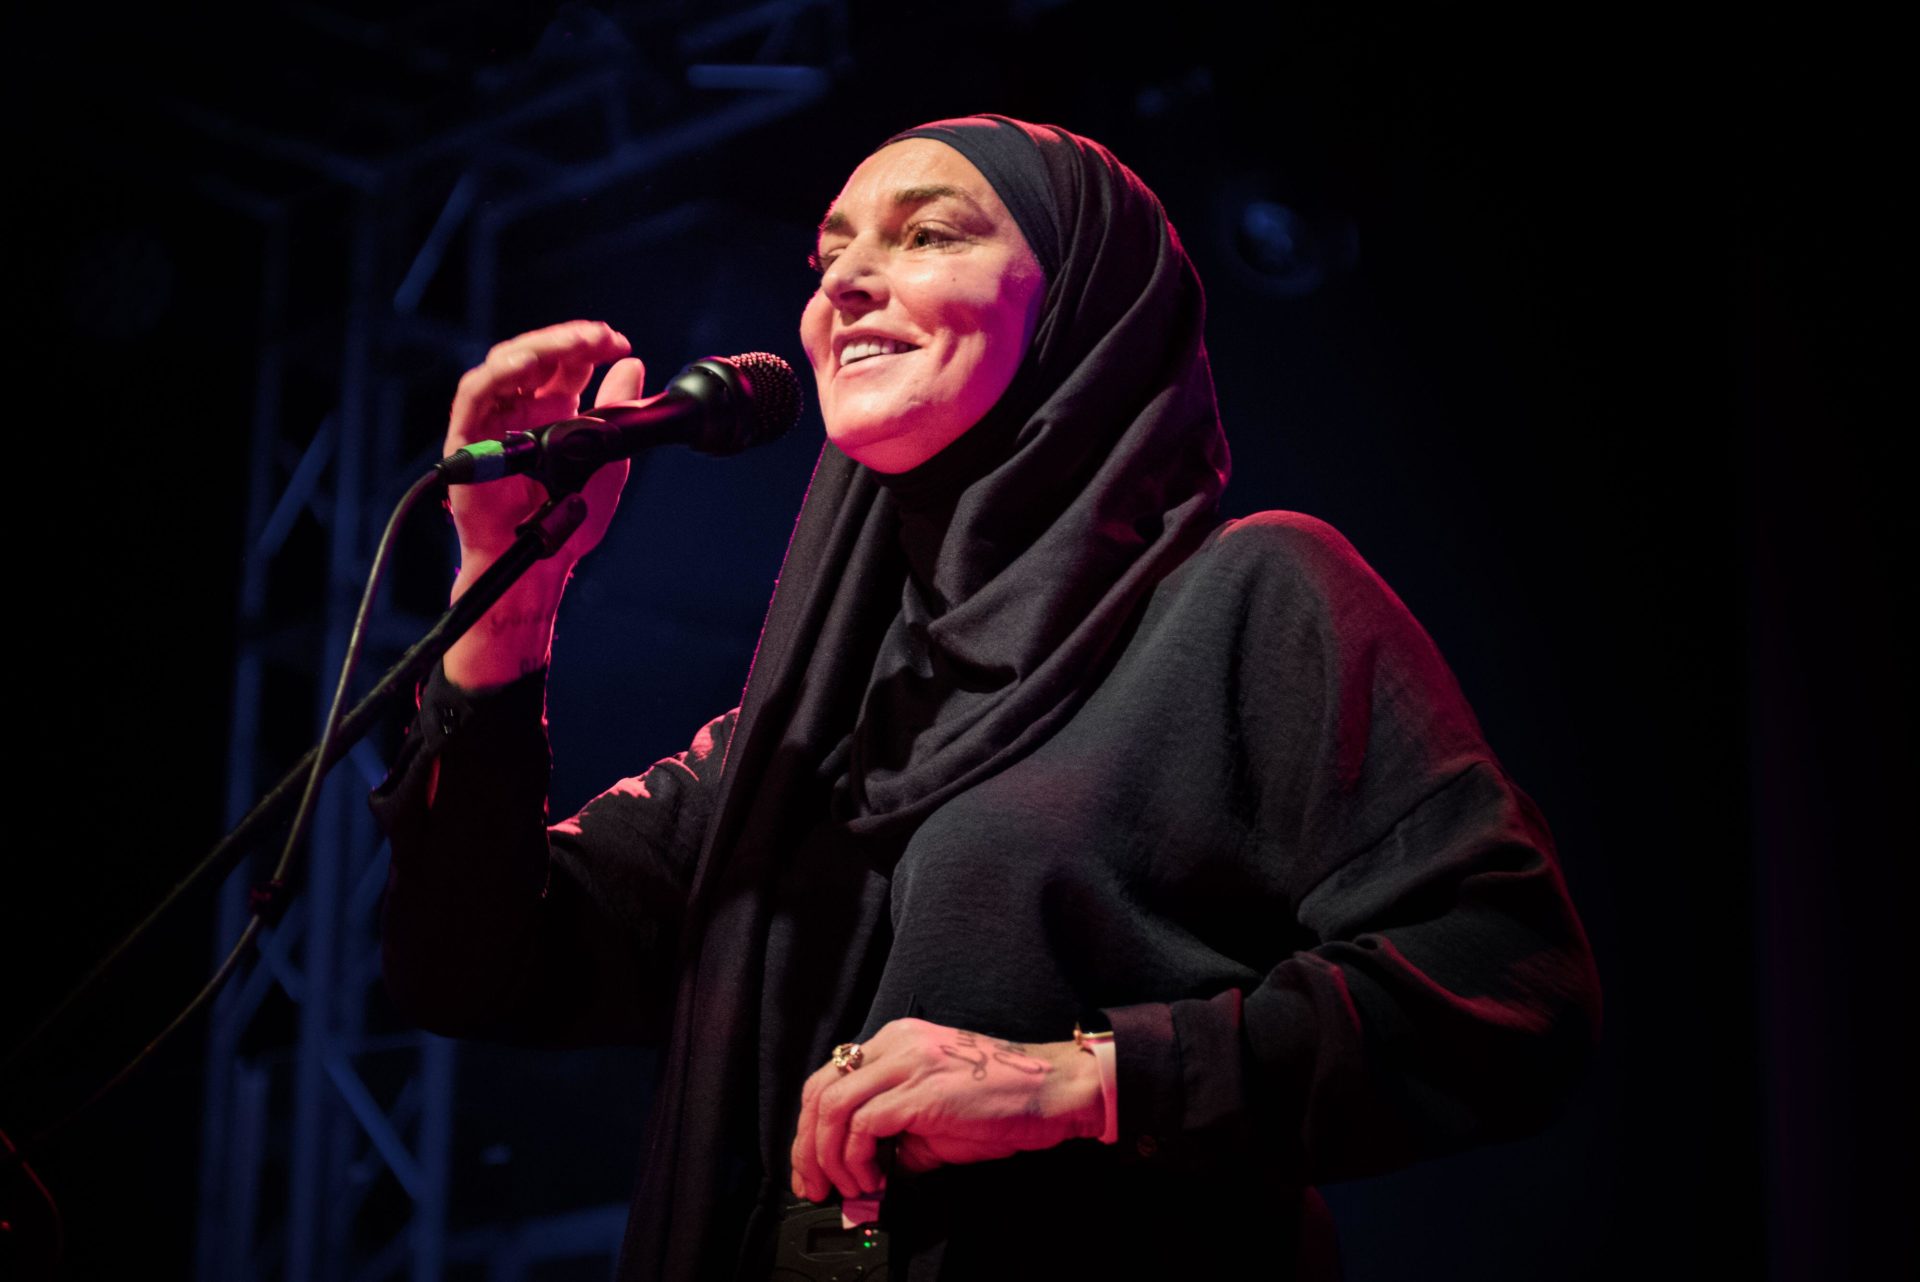 Sinead O'Connor performing at Hiroshima Mon Amour in Torino, Italy, 19-1-20.